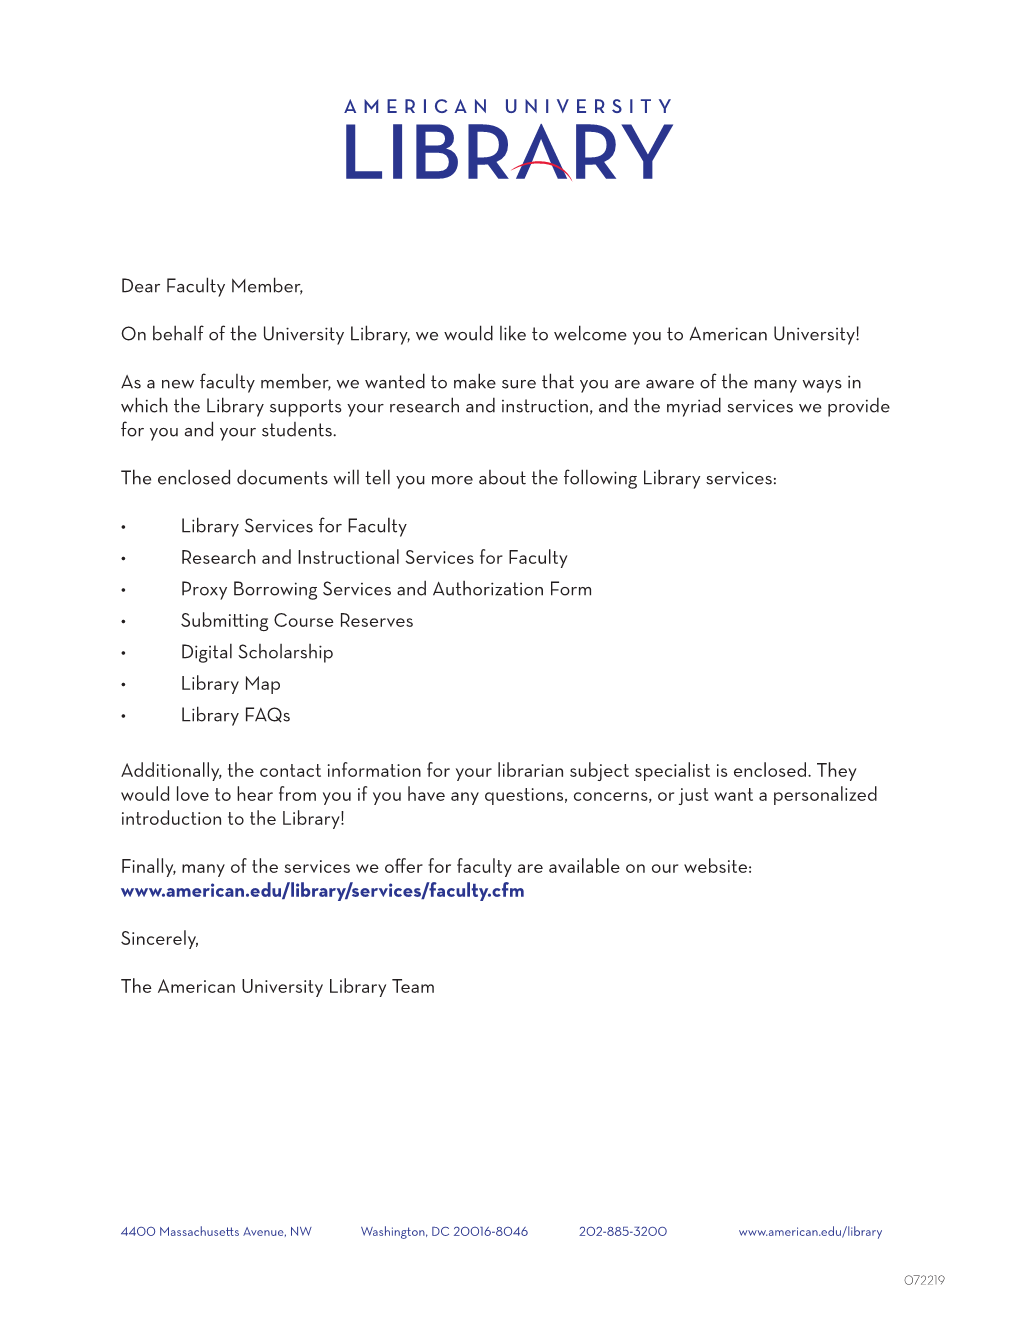 Library Services for Faculty 2019